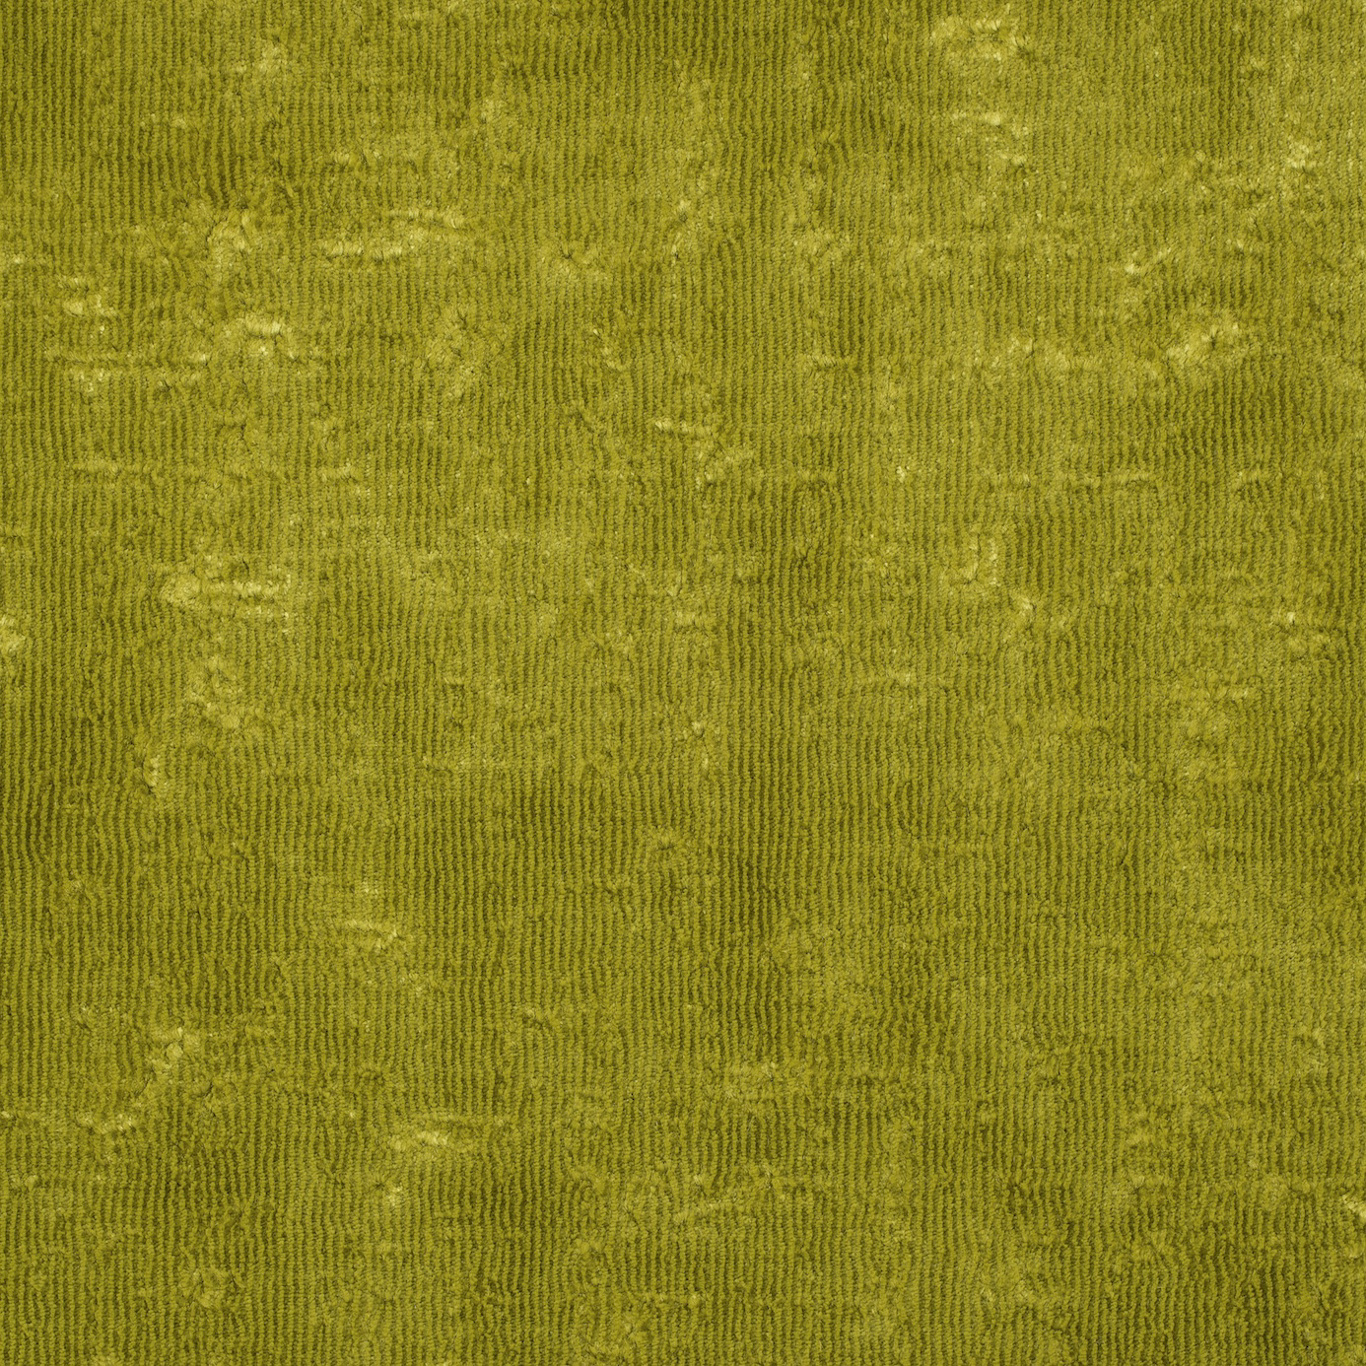 Curzon Antique Gold Fabric by ZOF